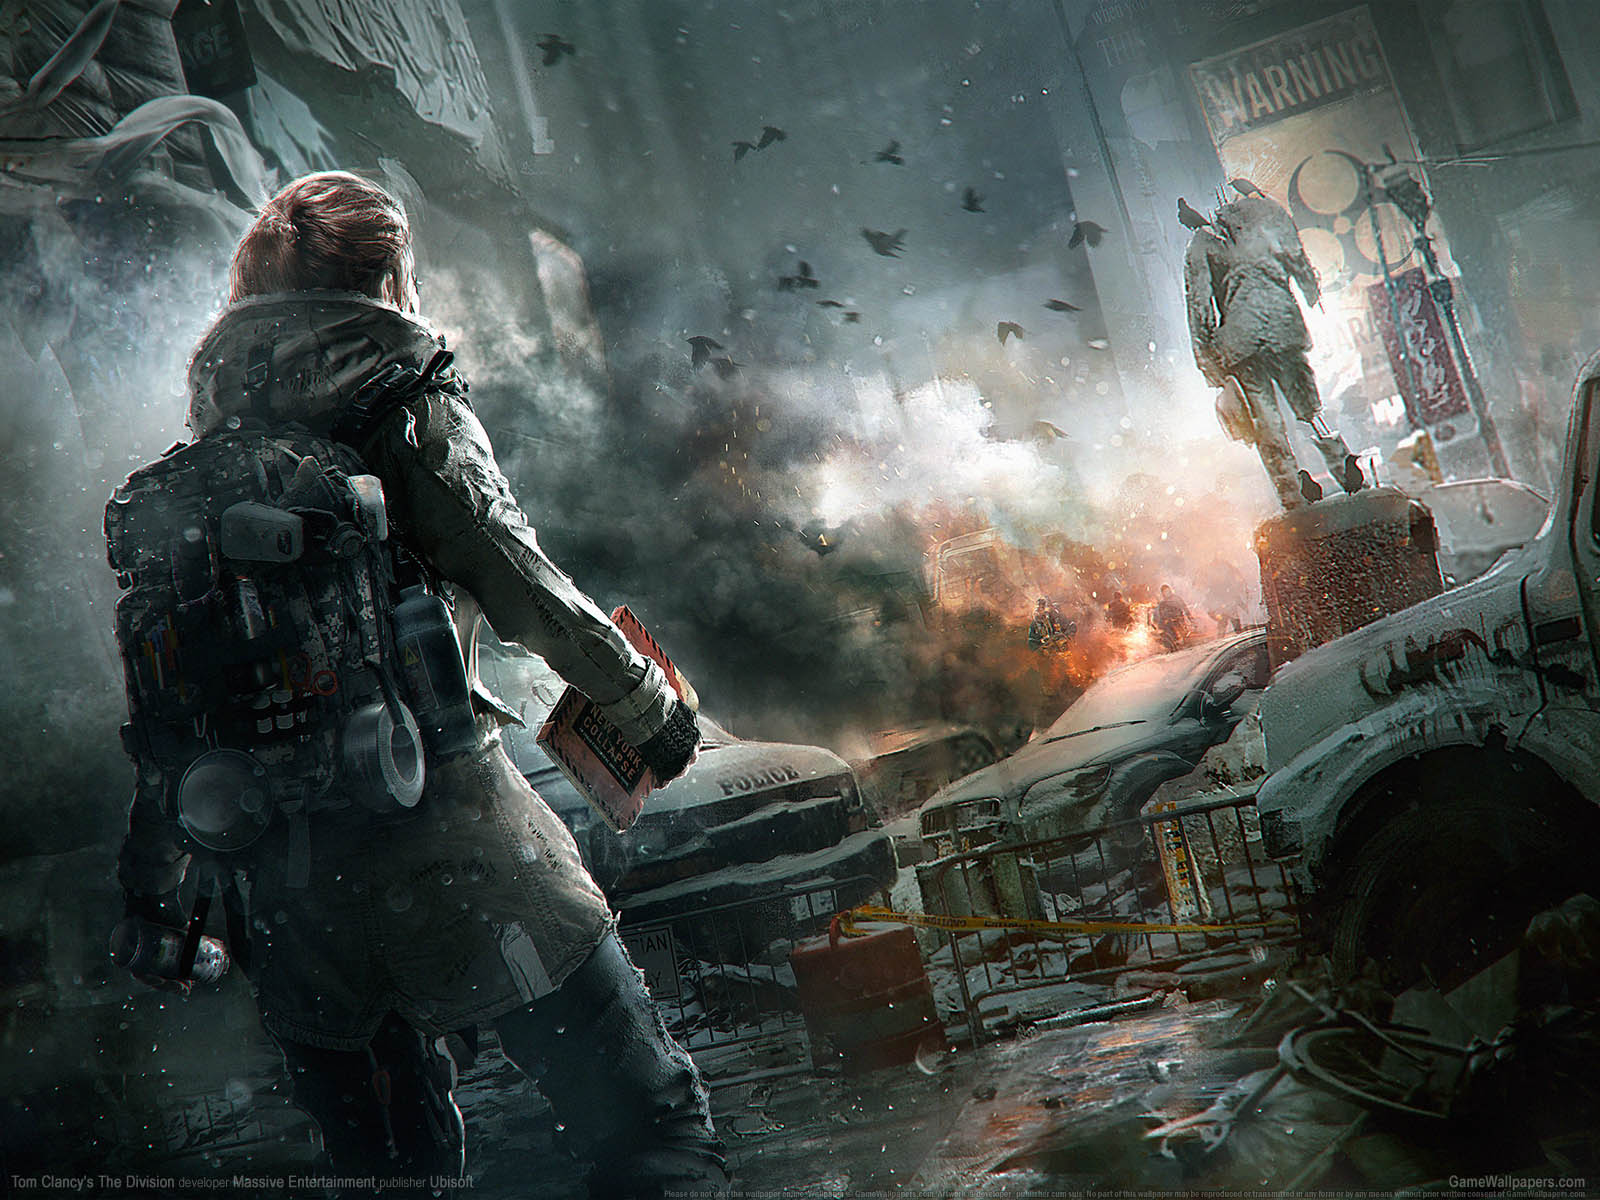 Tom Clancy's The Divisionνmmer=08 wallpaper  1600x1200